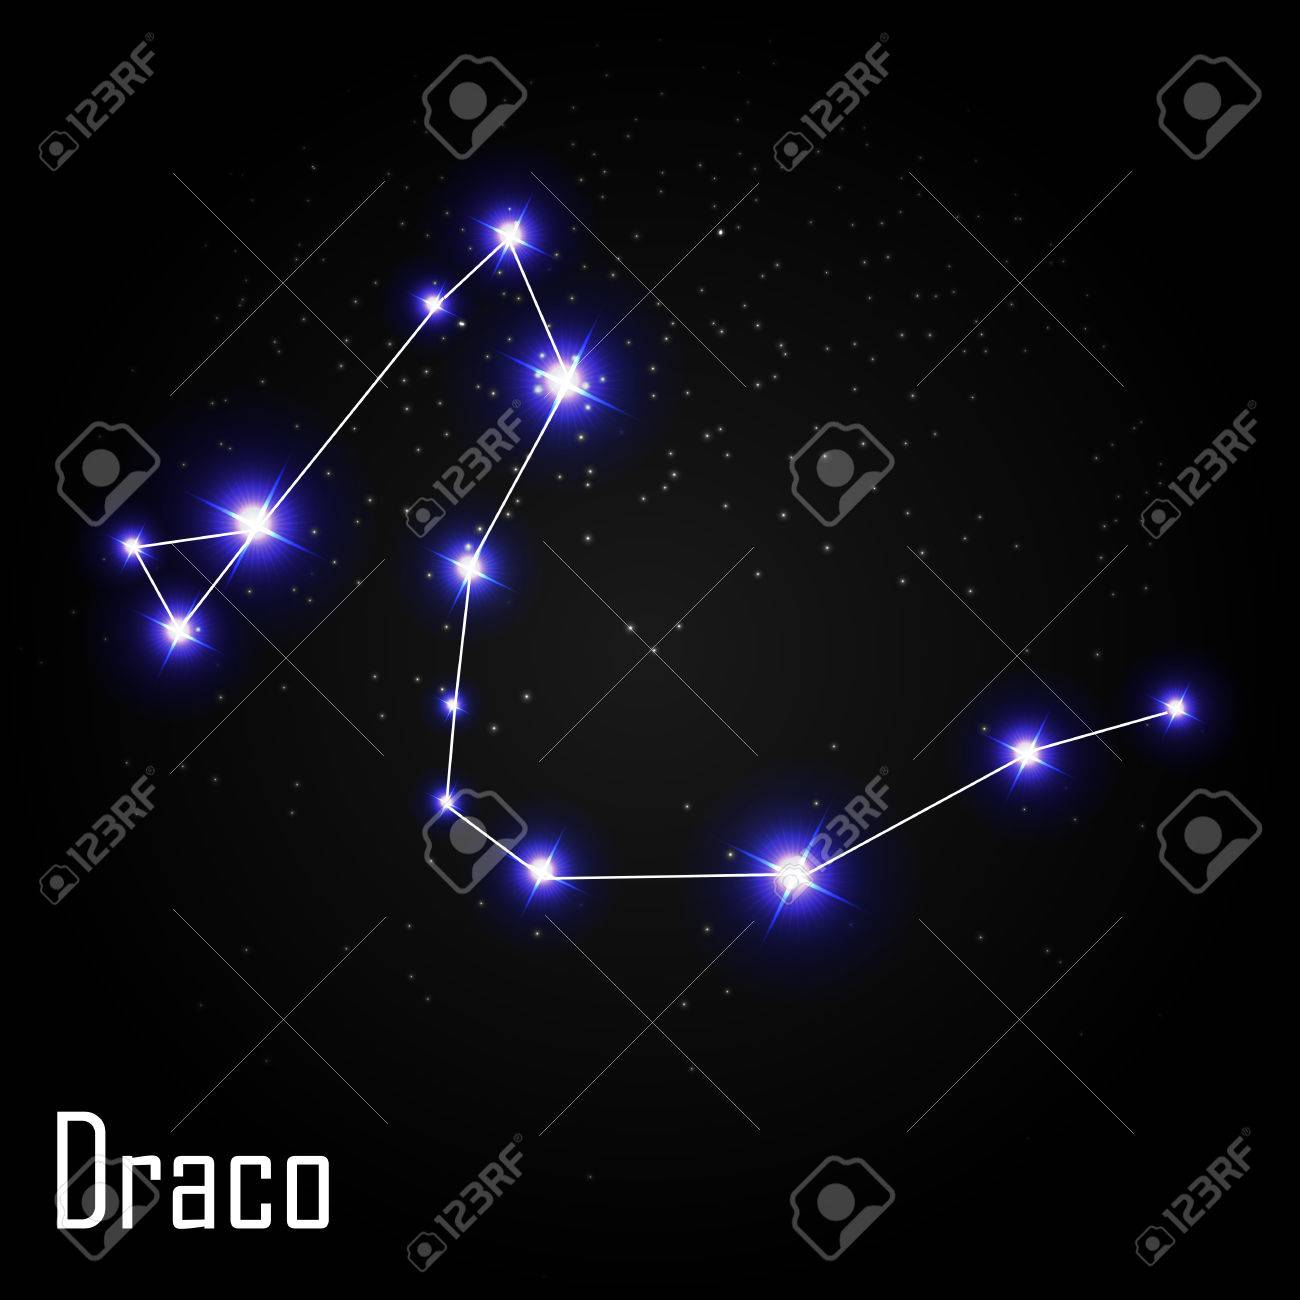 Draco Constellation With Beautiful Bright Stars On The Background